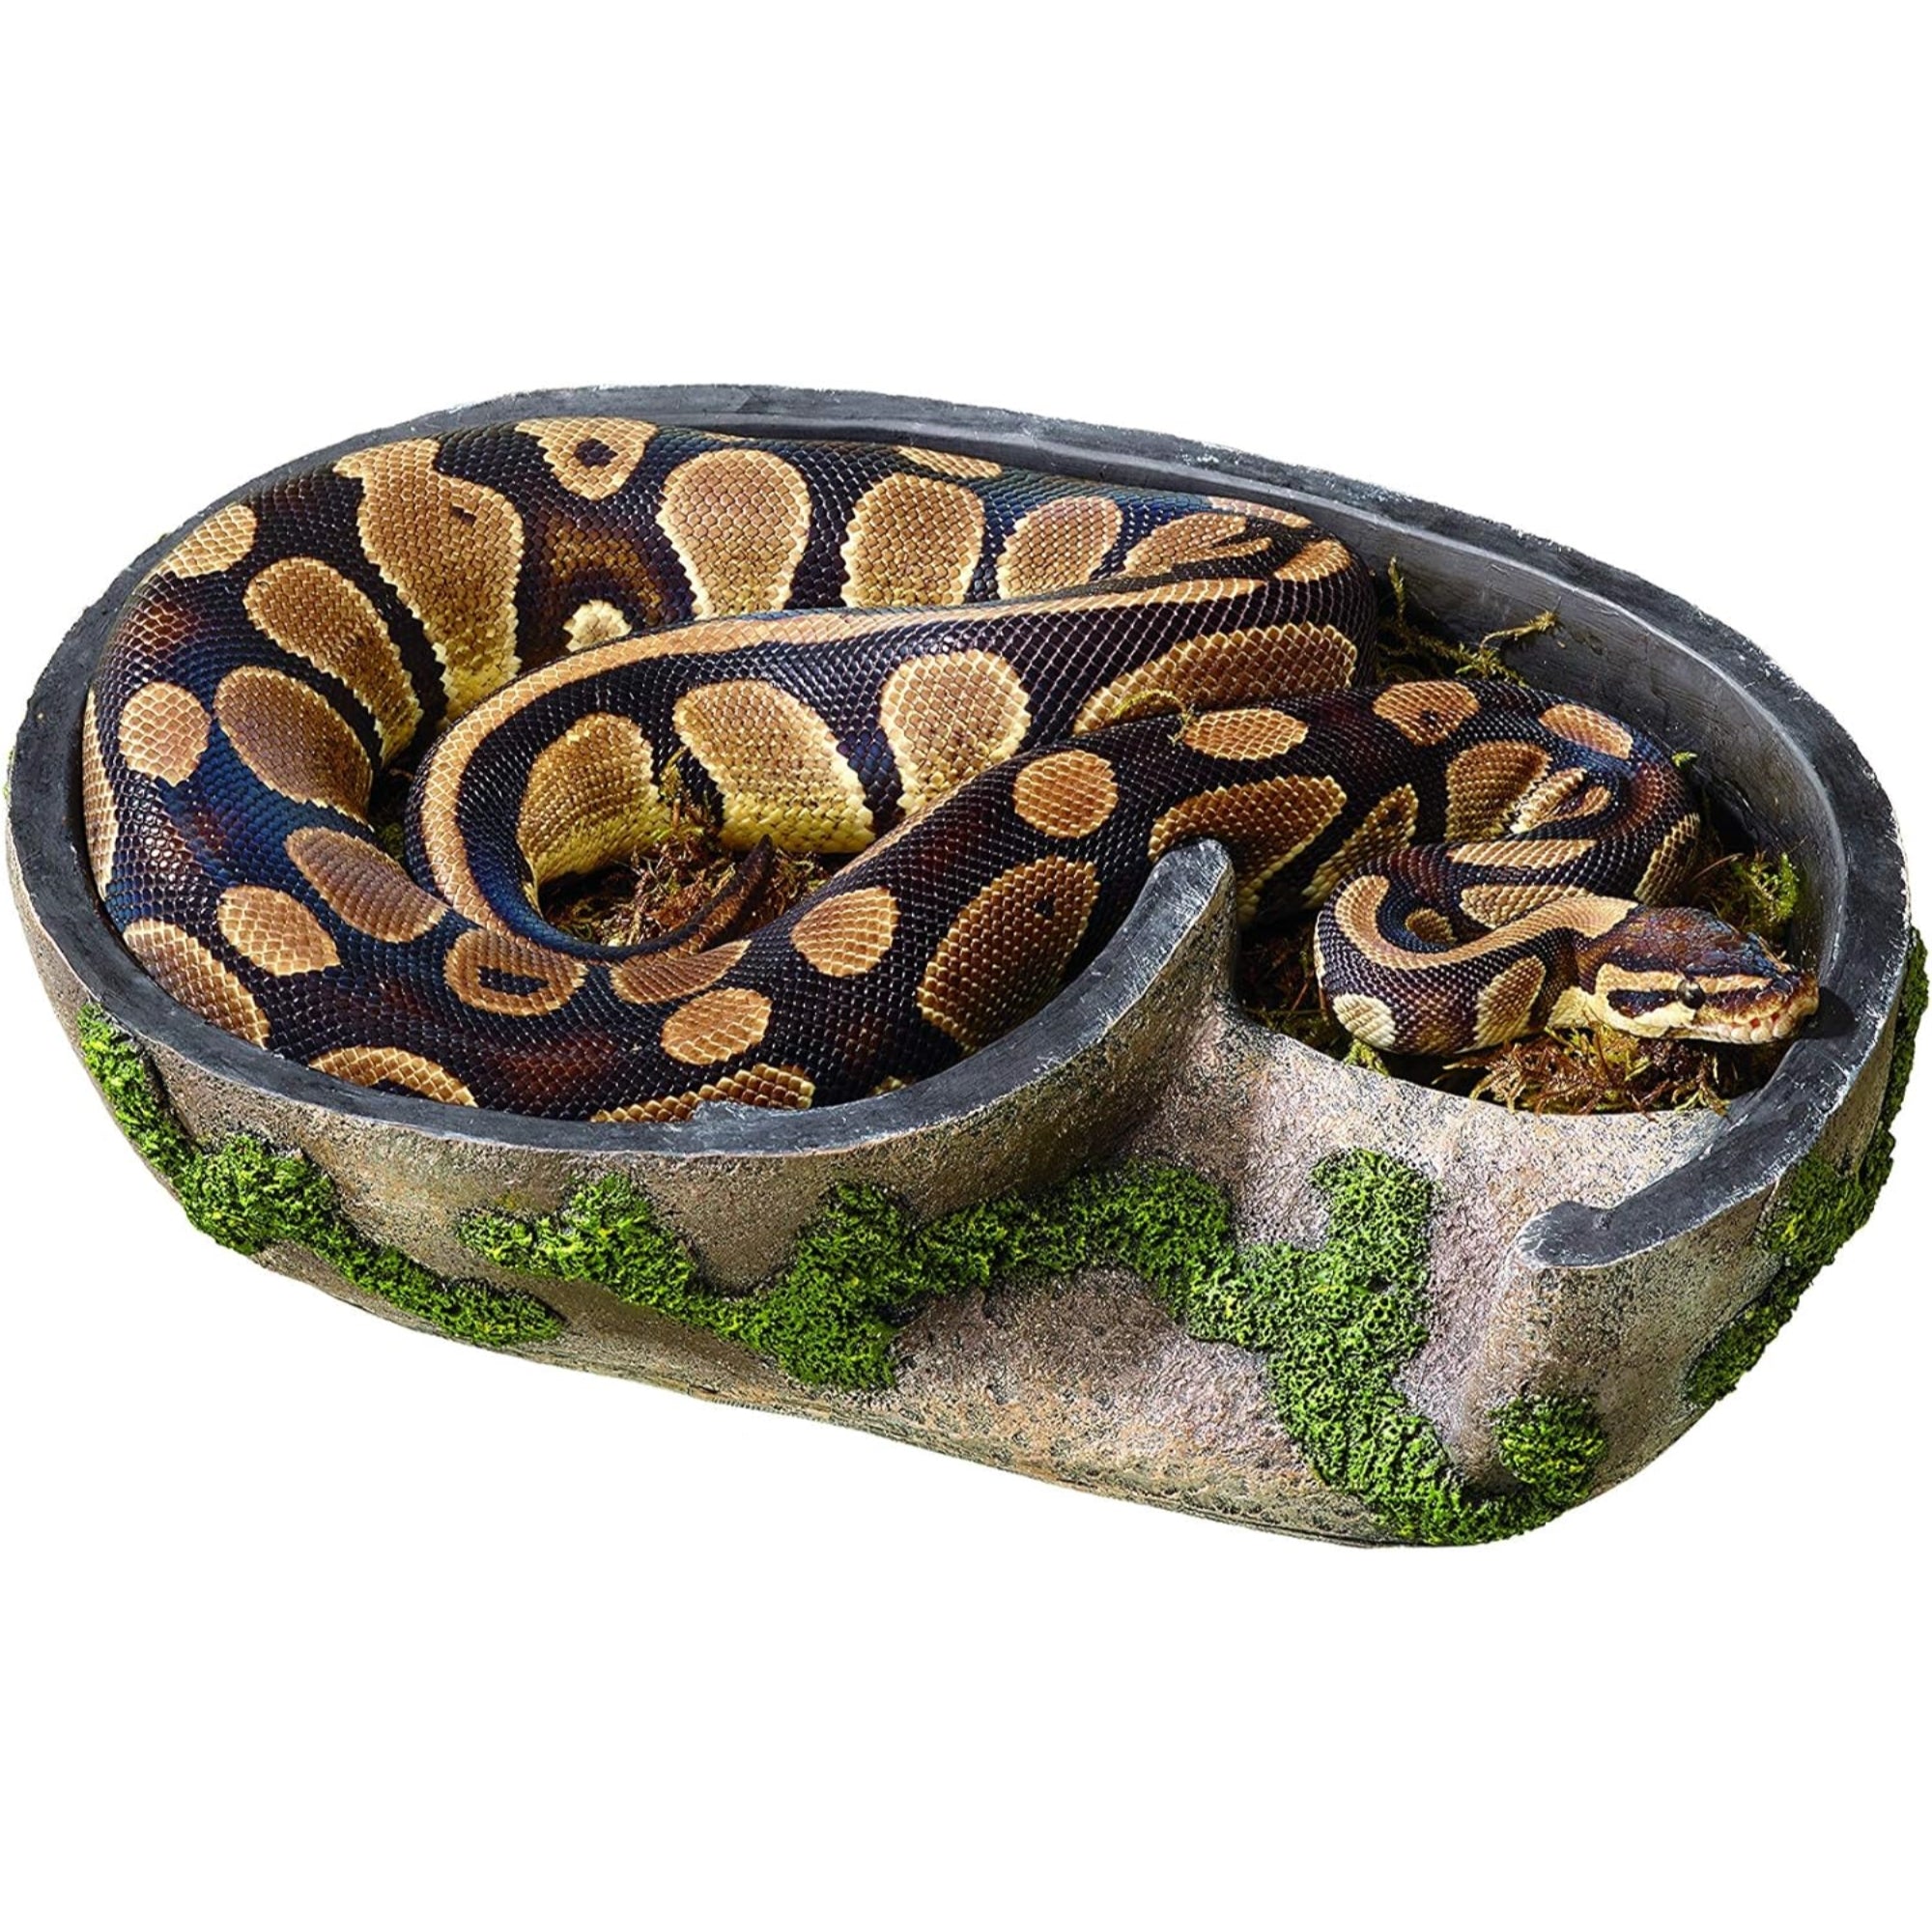 Zilla Rock Lair Terrarium Hideout for Snakes with Removable Top, Extra Large